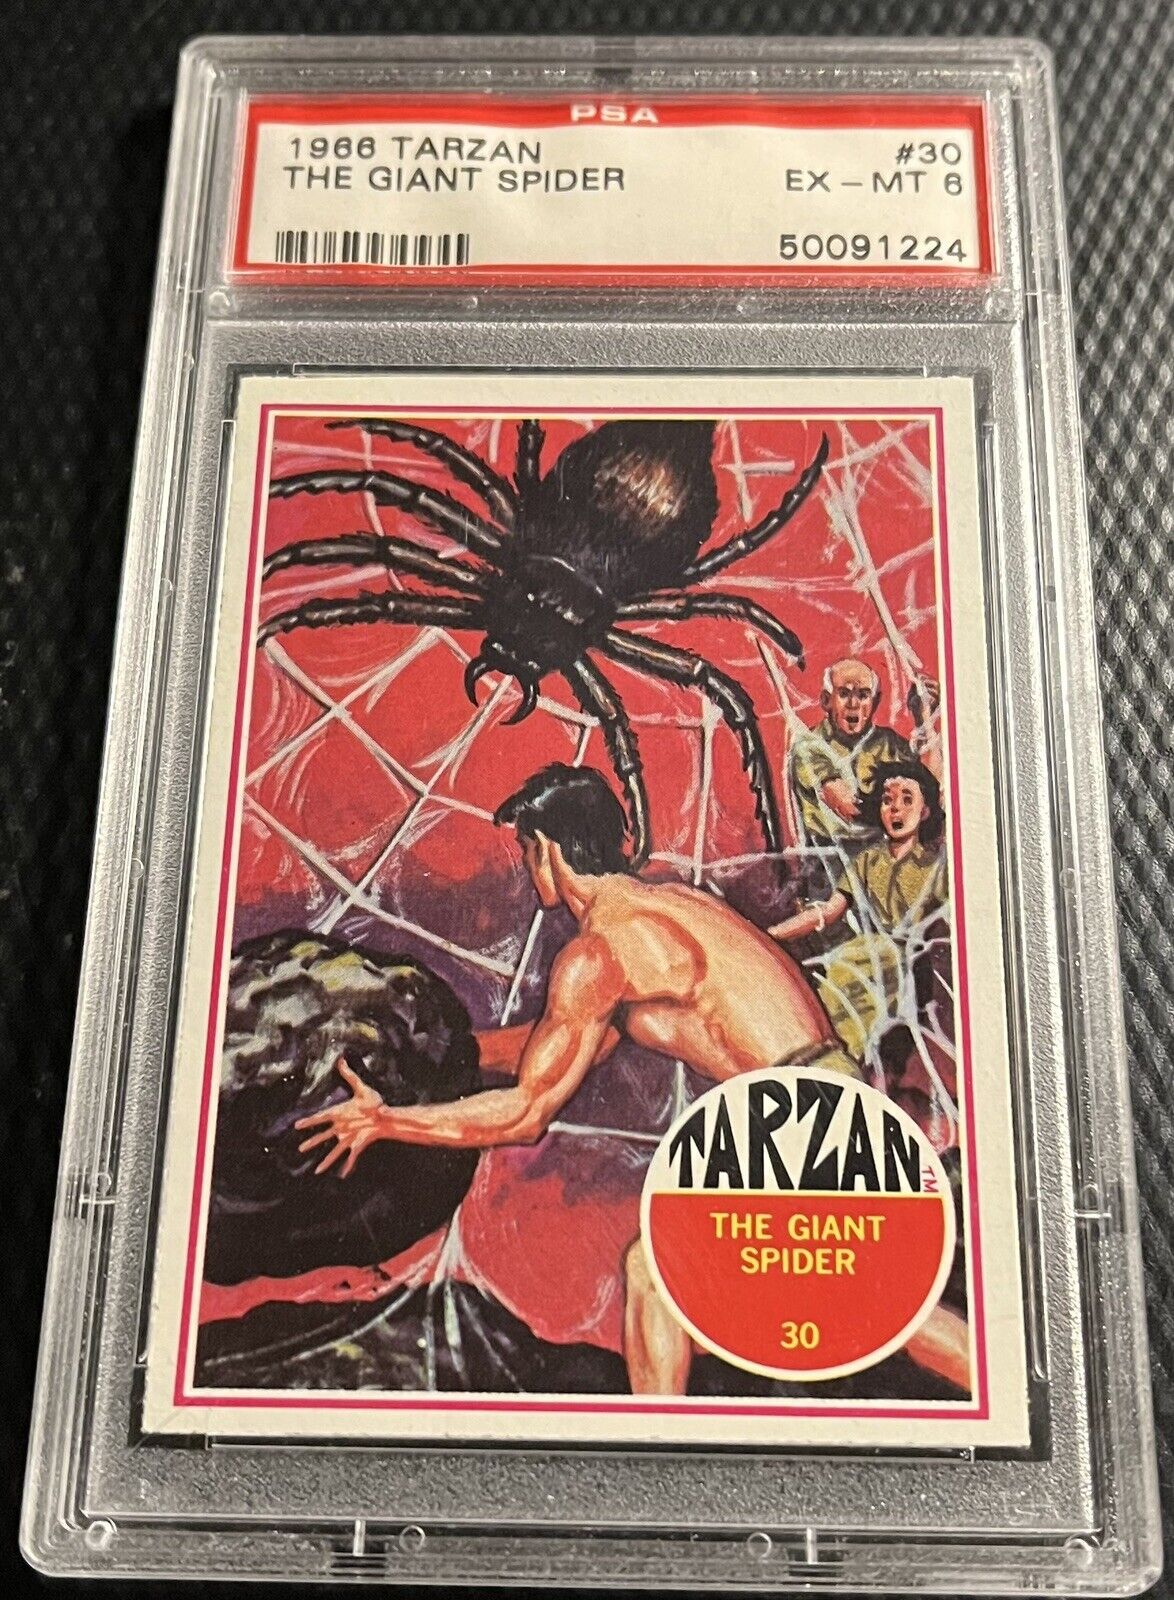 1966 Fleer Tarzan PSA 6 Card #30 Featuring The Giant Spider - Vintage Philly